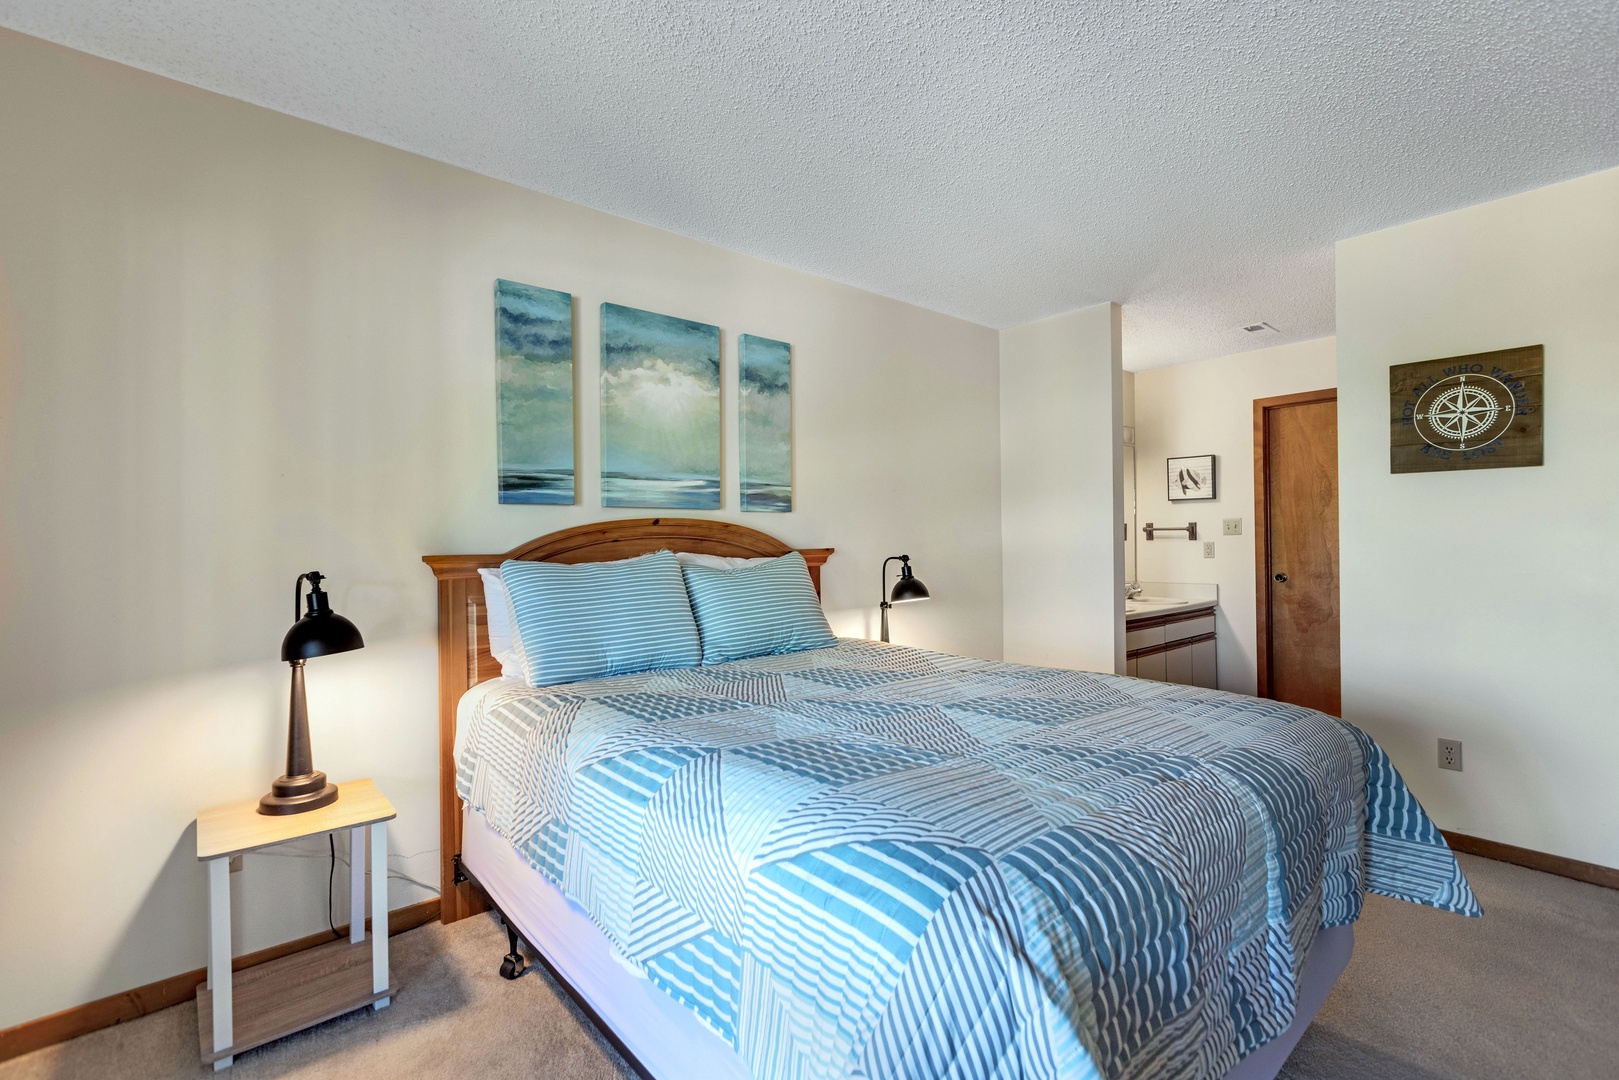 The primary bedroom offers a queen bed, deck access, & a private ensuite